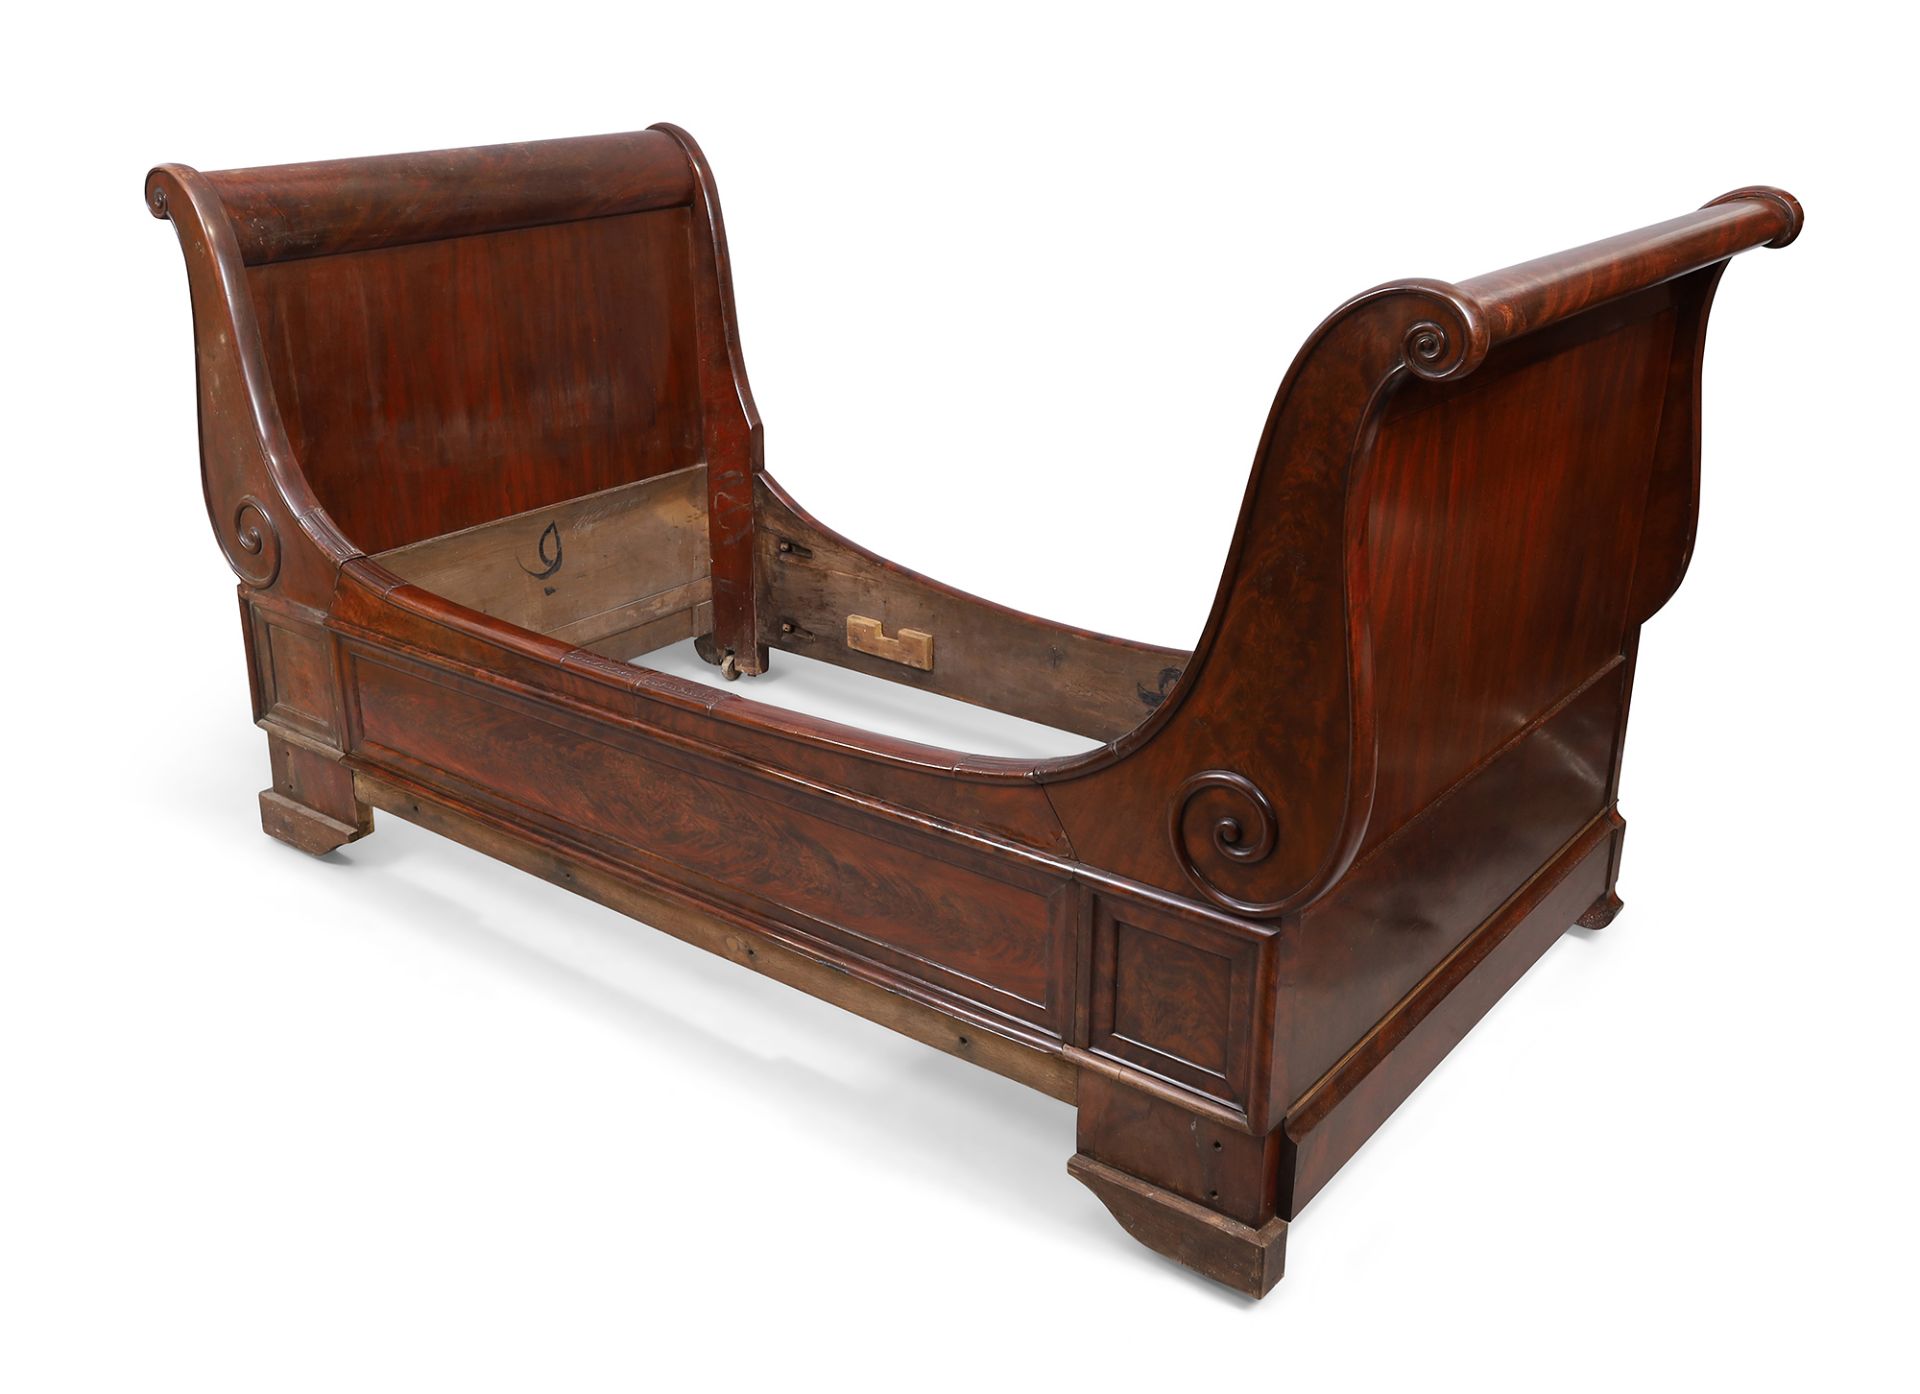 A French mahogany bateau lit, 19th century, with scroll ends and mouldings, 112cm high, 210cm wid...